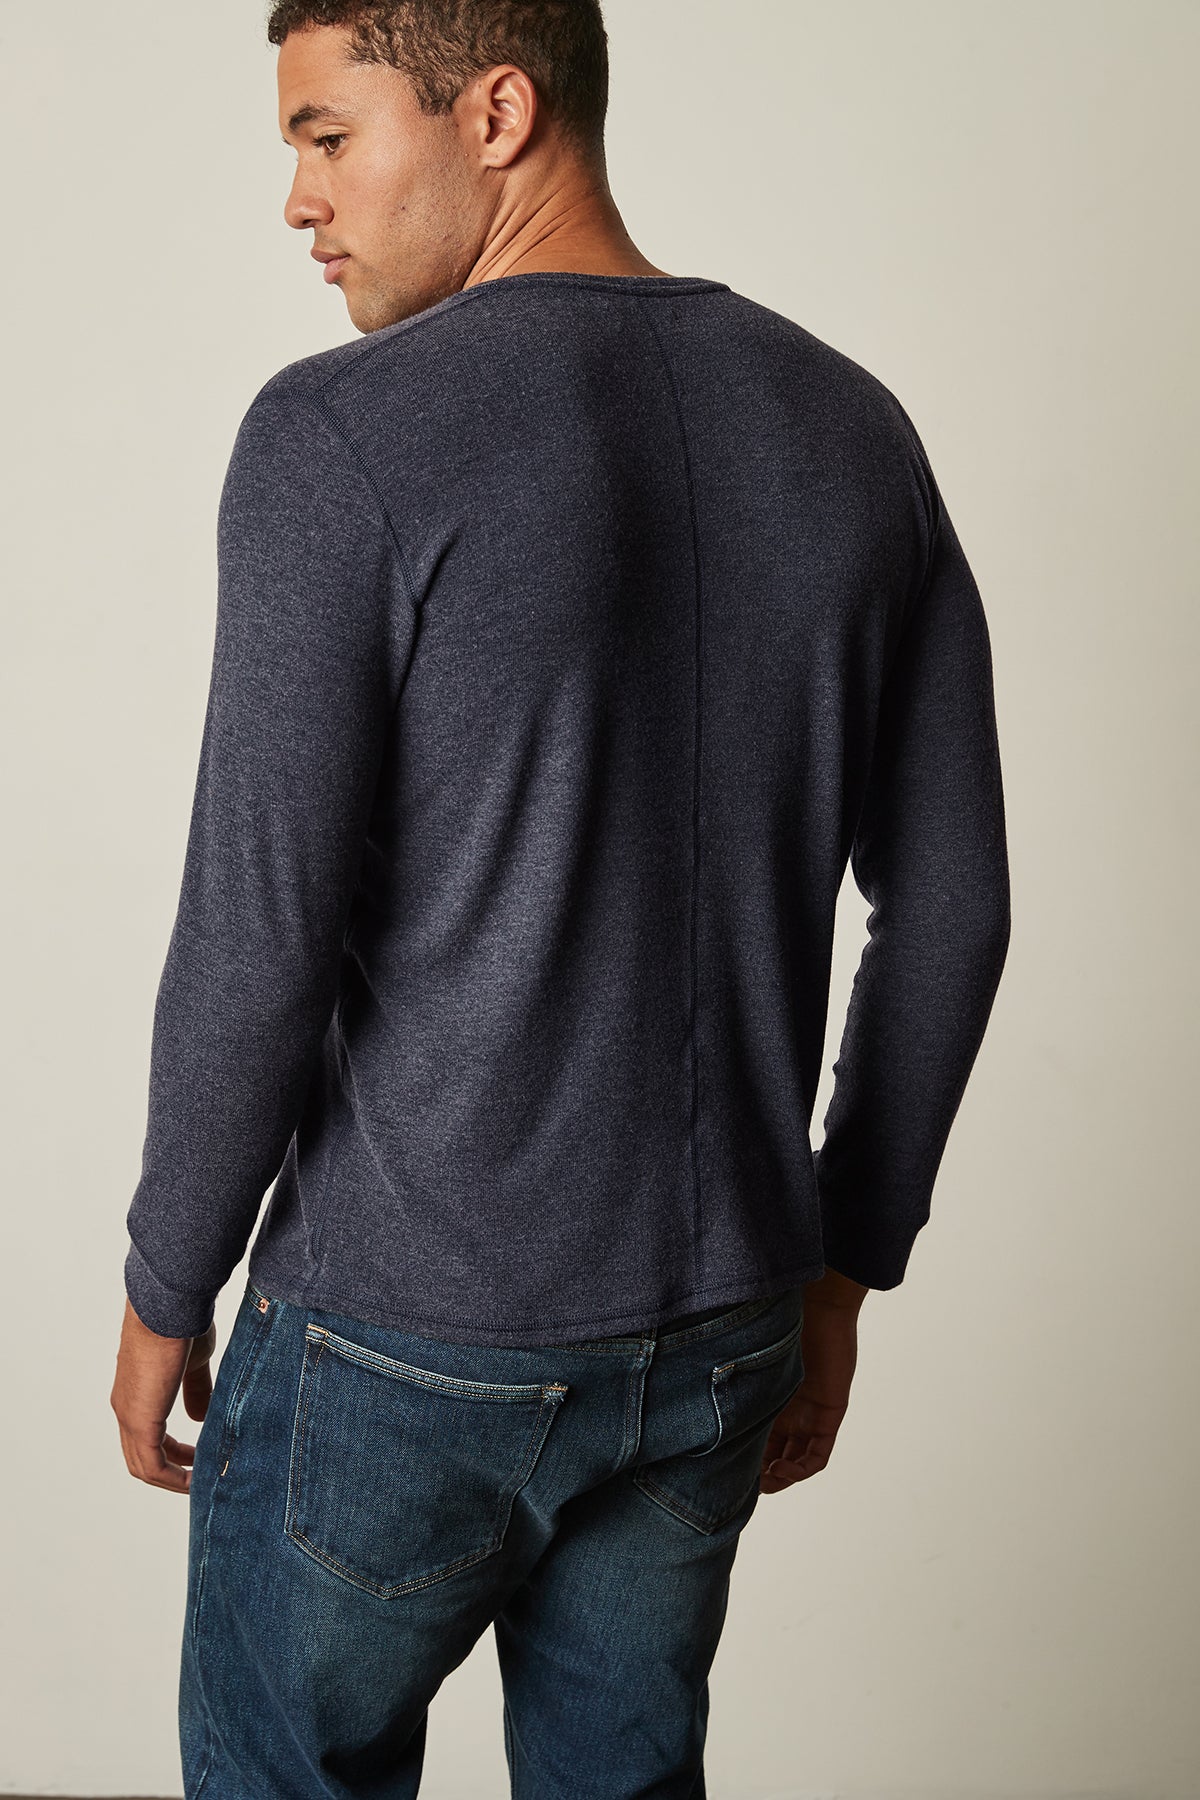 The versatile man is wearing Velvet by Graham & Spencer jeans and a Velvet by Graham & Spencer long-sleeved sweater, showcasing the fabric's layering potential.-25484011765953